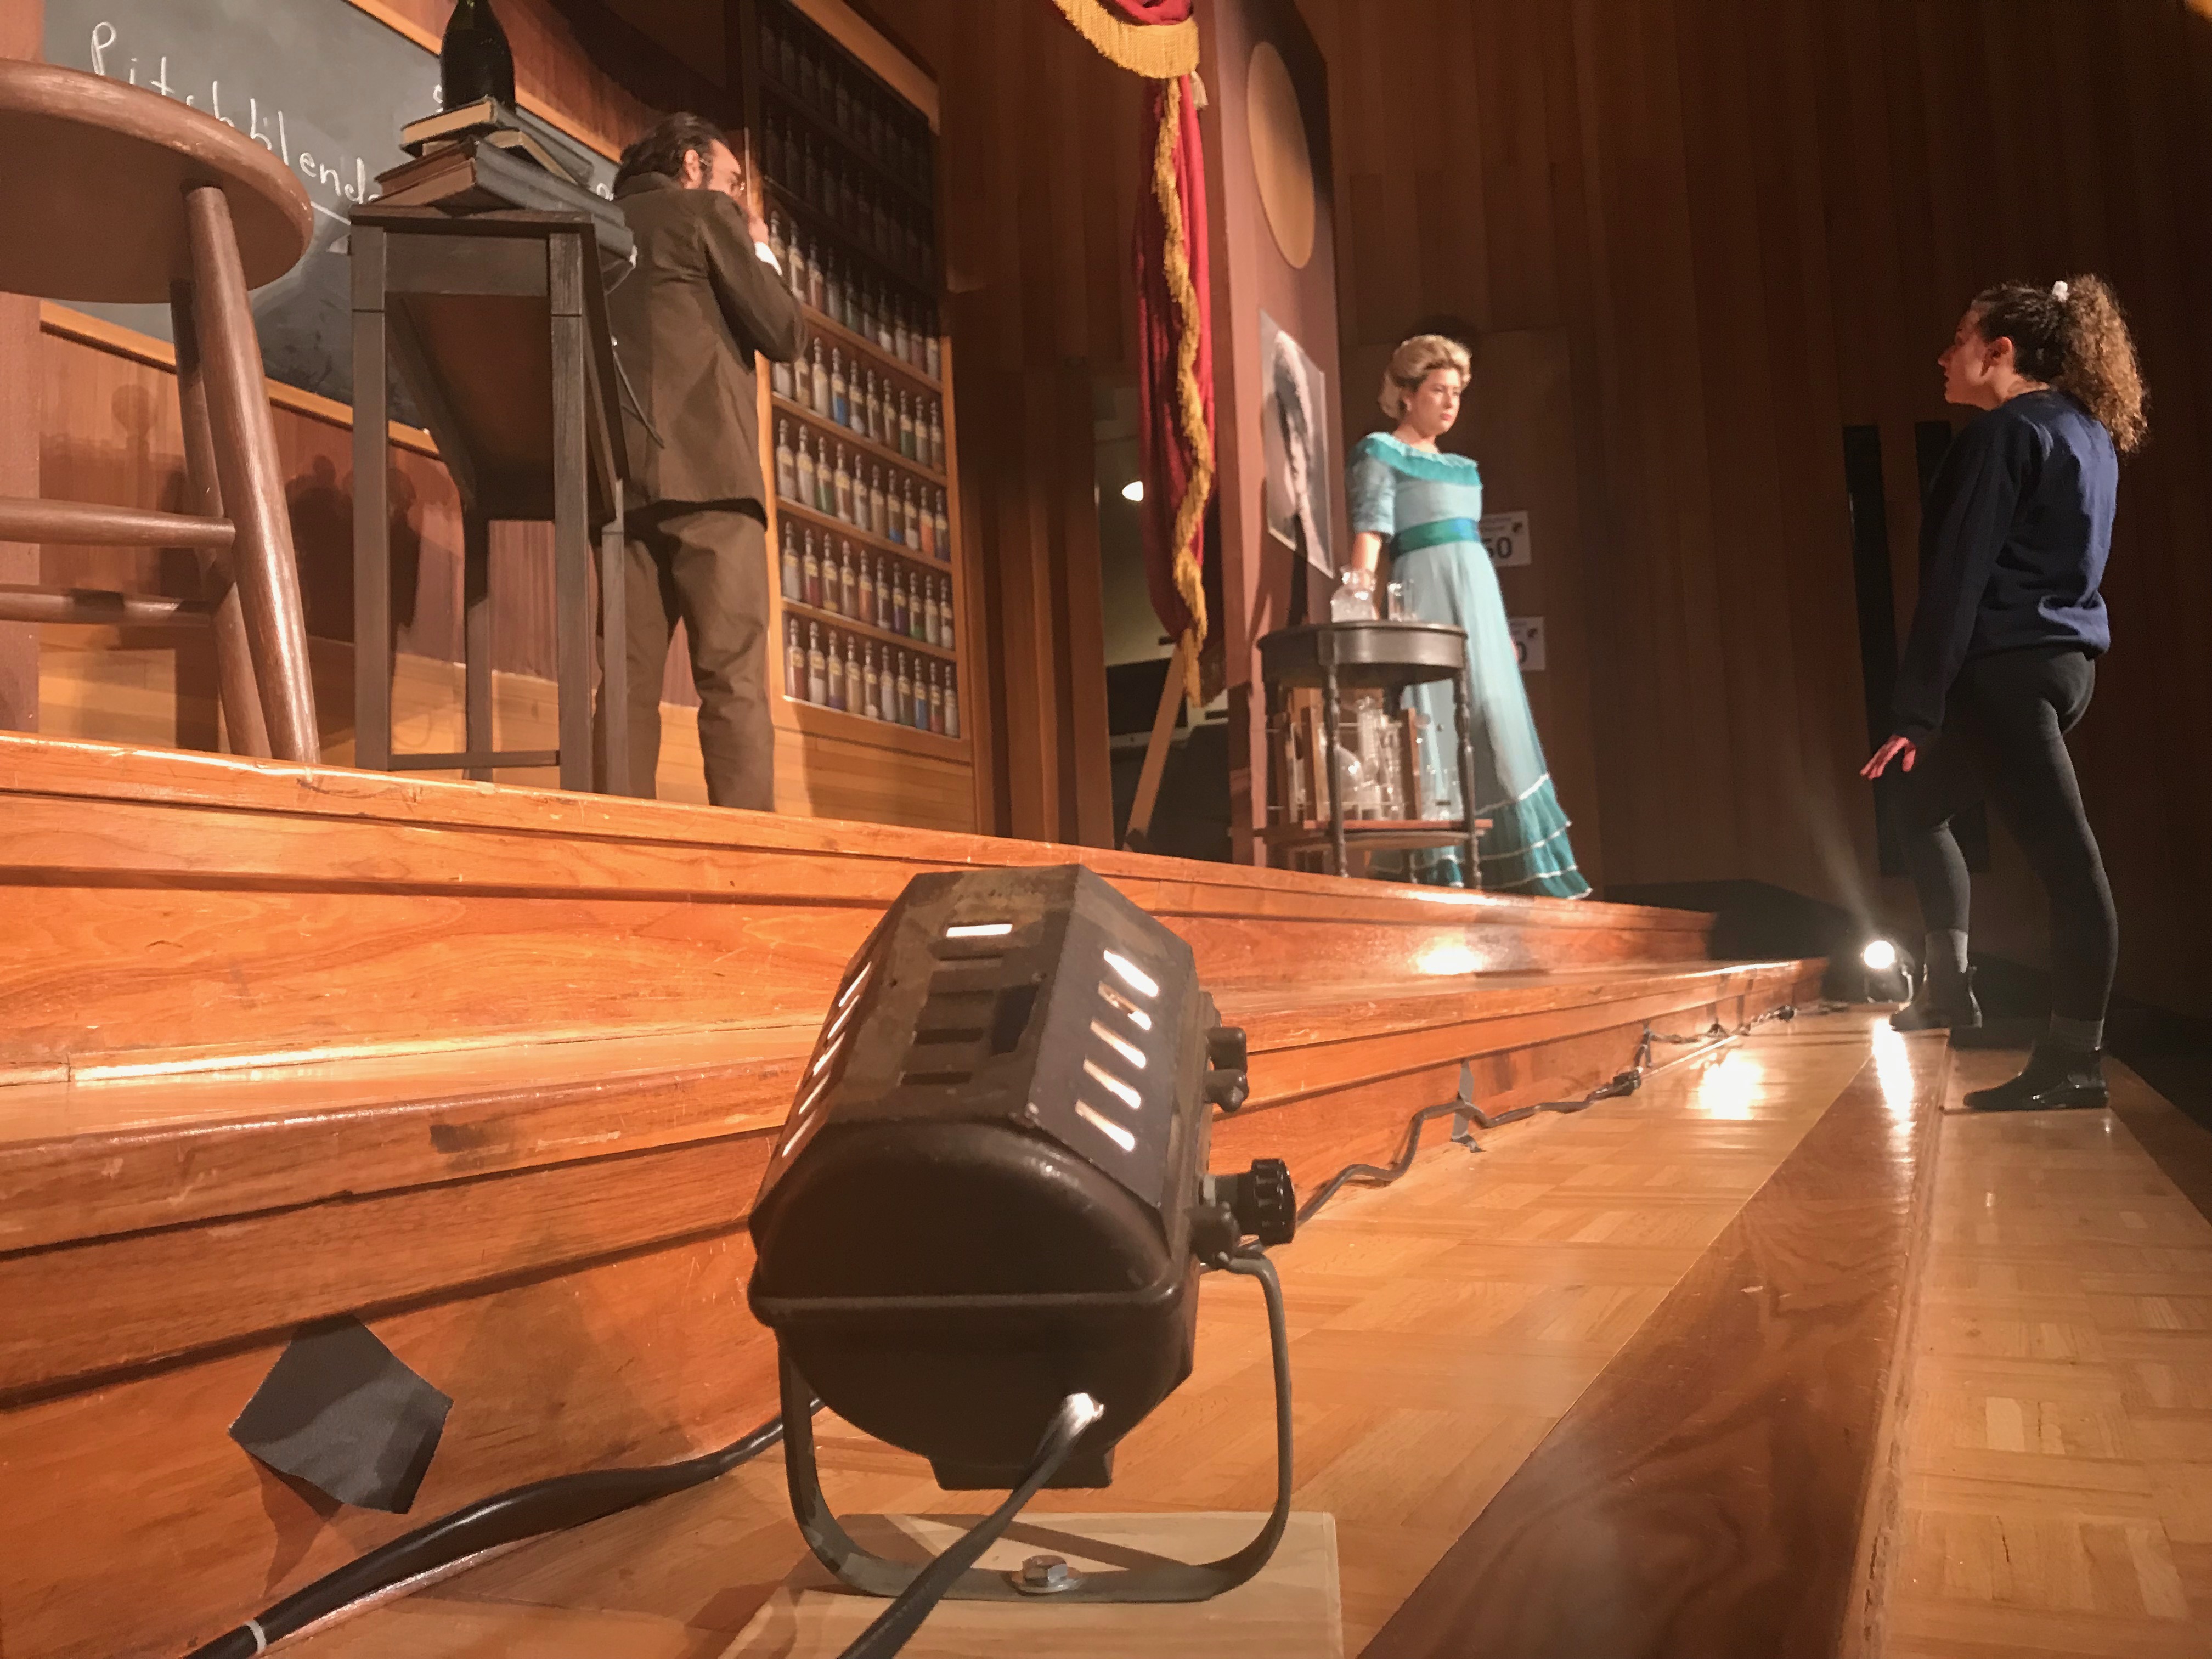 "Echoes" cast and crew run through dress rehearsal days before opening night